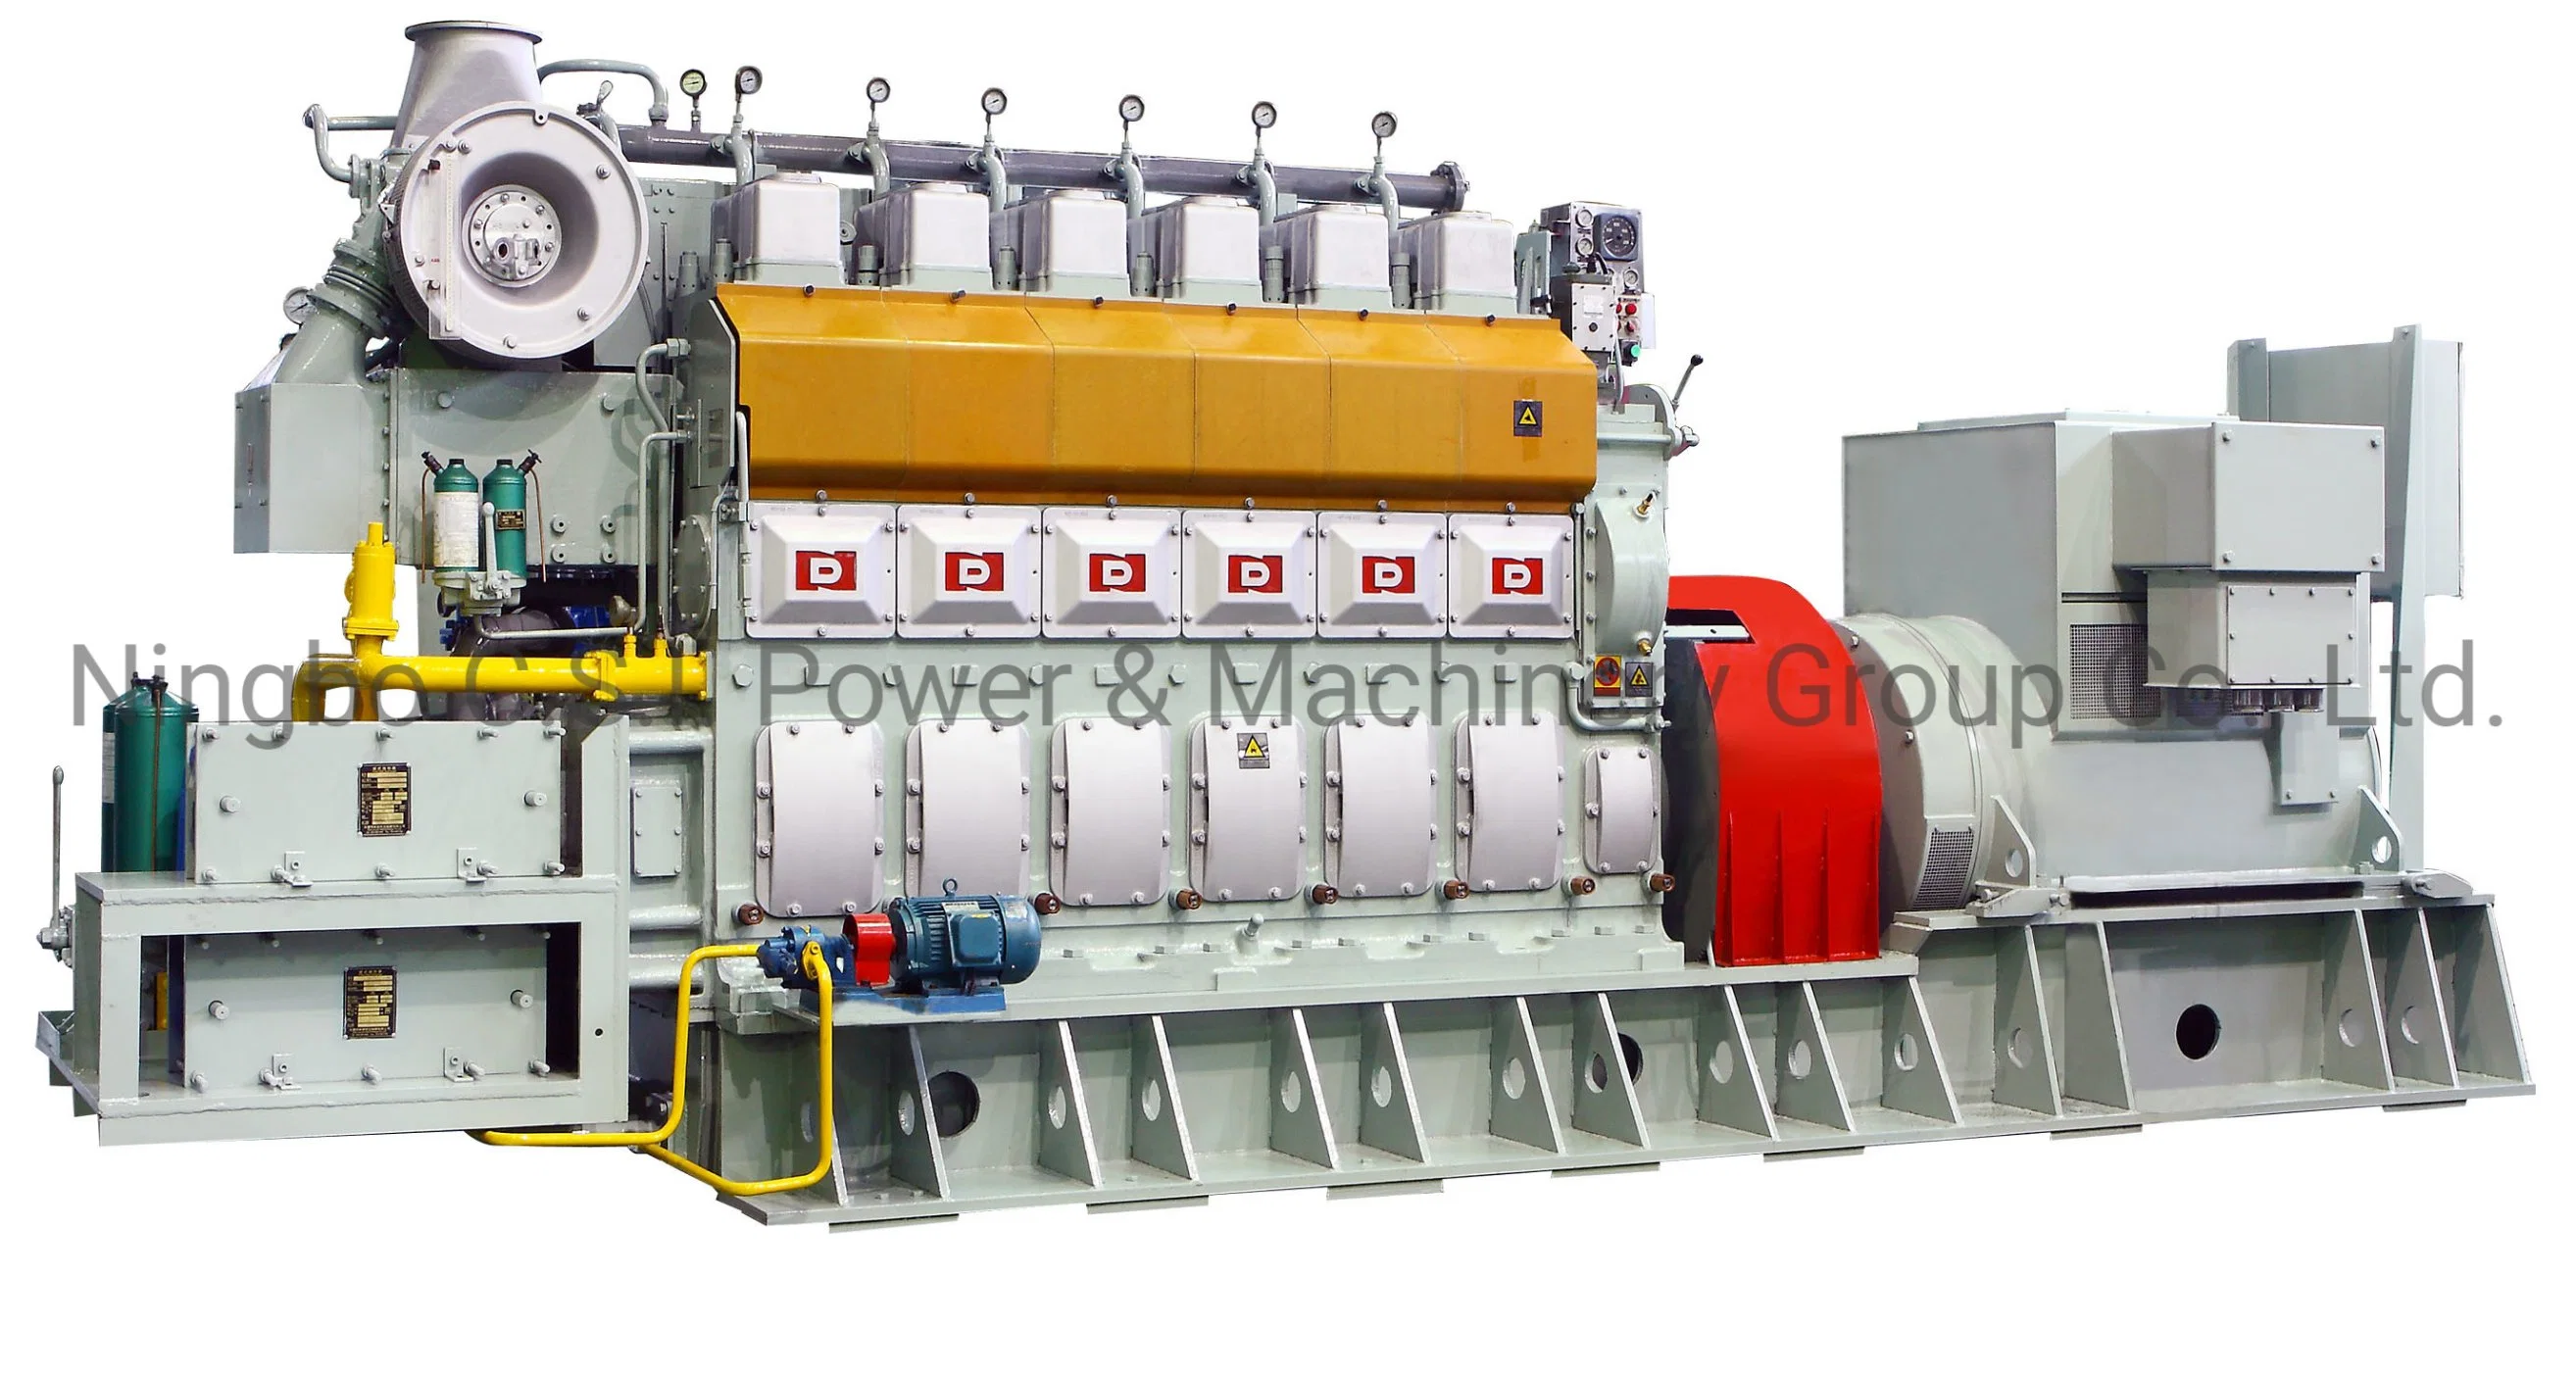 21/30 Engine Driven Generator Set &AMP with Diesel, Hfo, Natural Gas, Tire Oil, Dual Fuel, Spare Parts